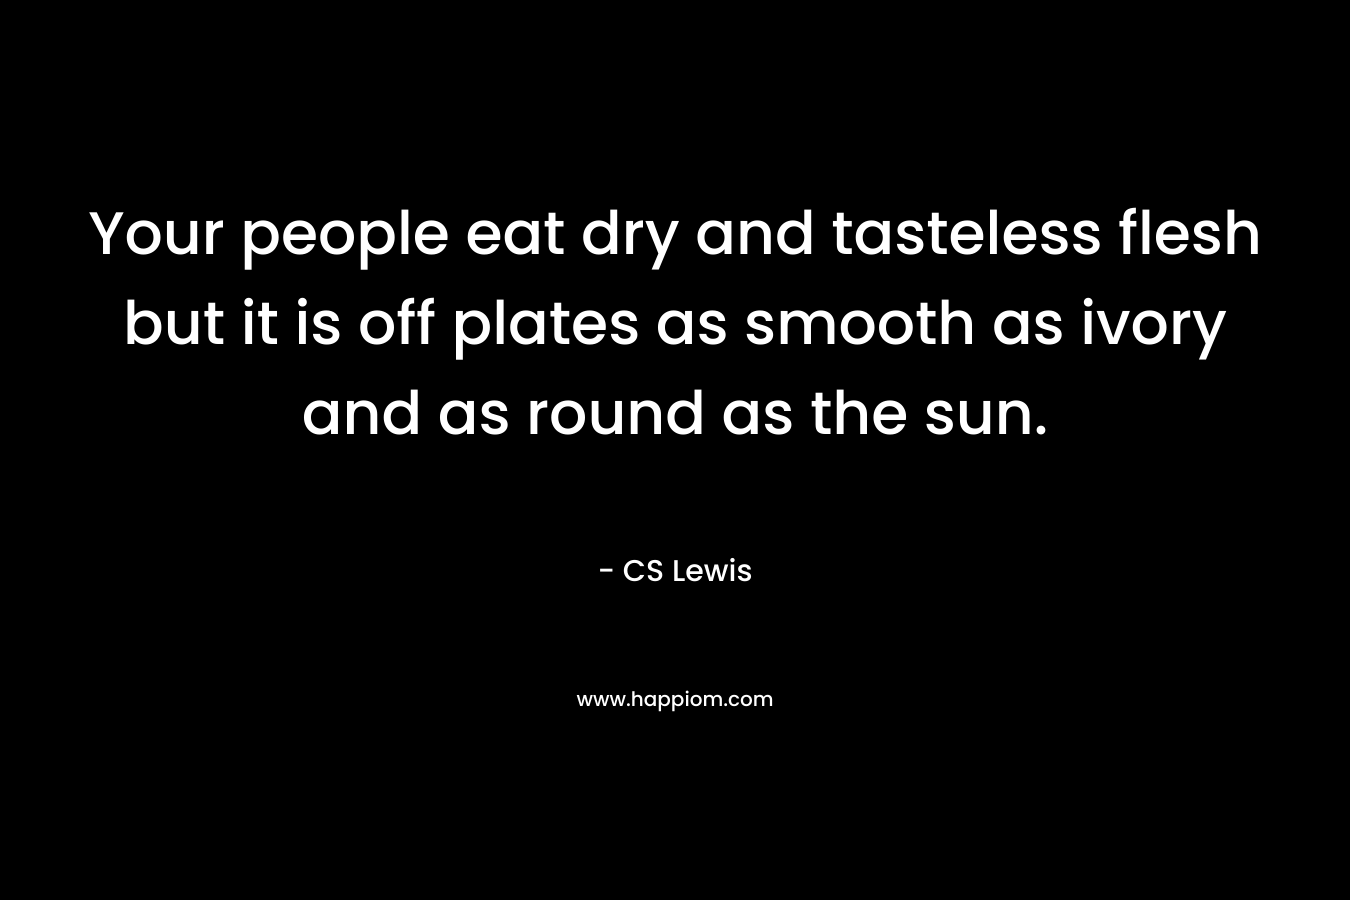 Your people eat dry and tasteless flesh but it is off plates as smooth as ivory and as round as the sun.